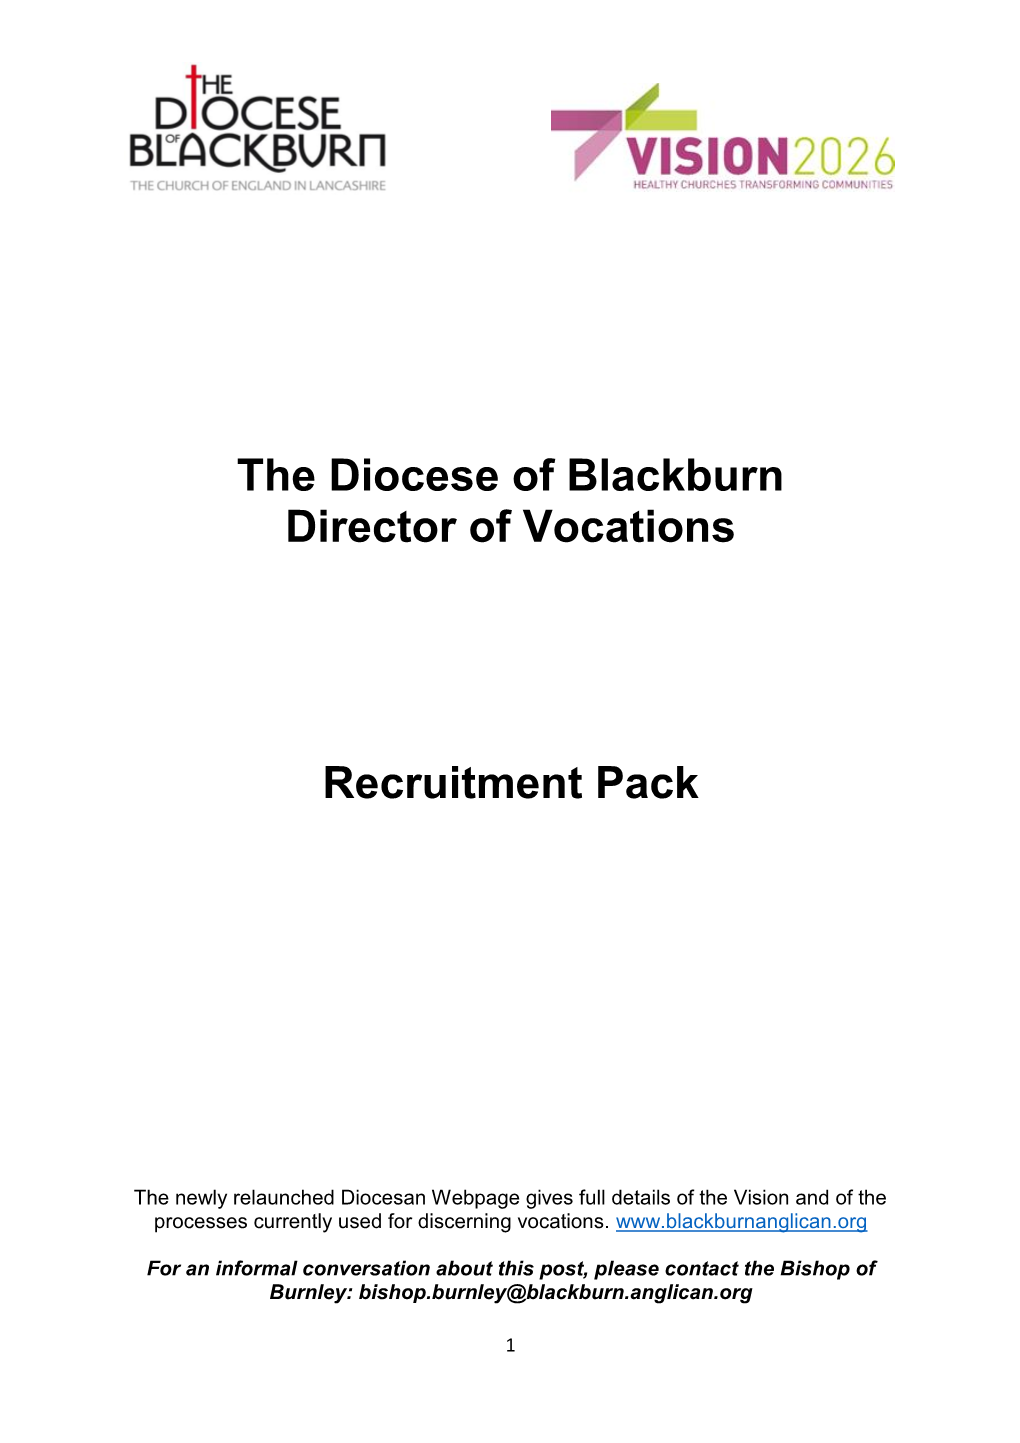 The Diocese of Blackburn Director of Vocations Recruitment Pack